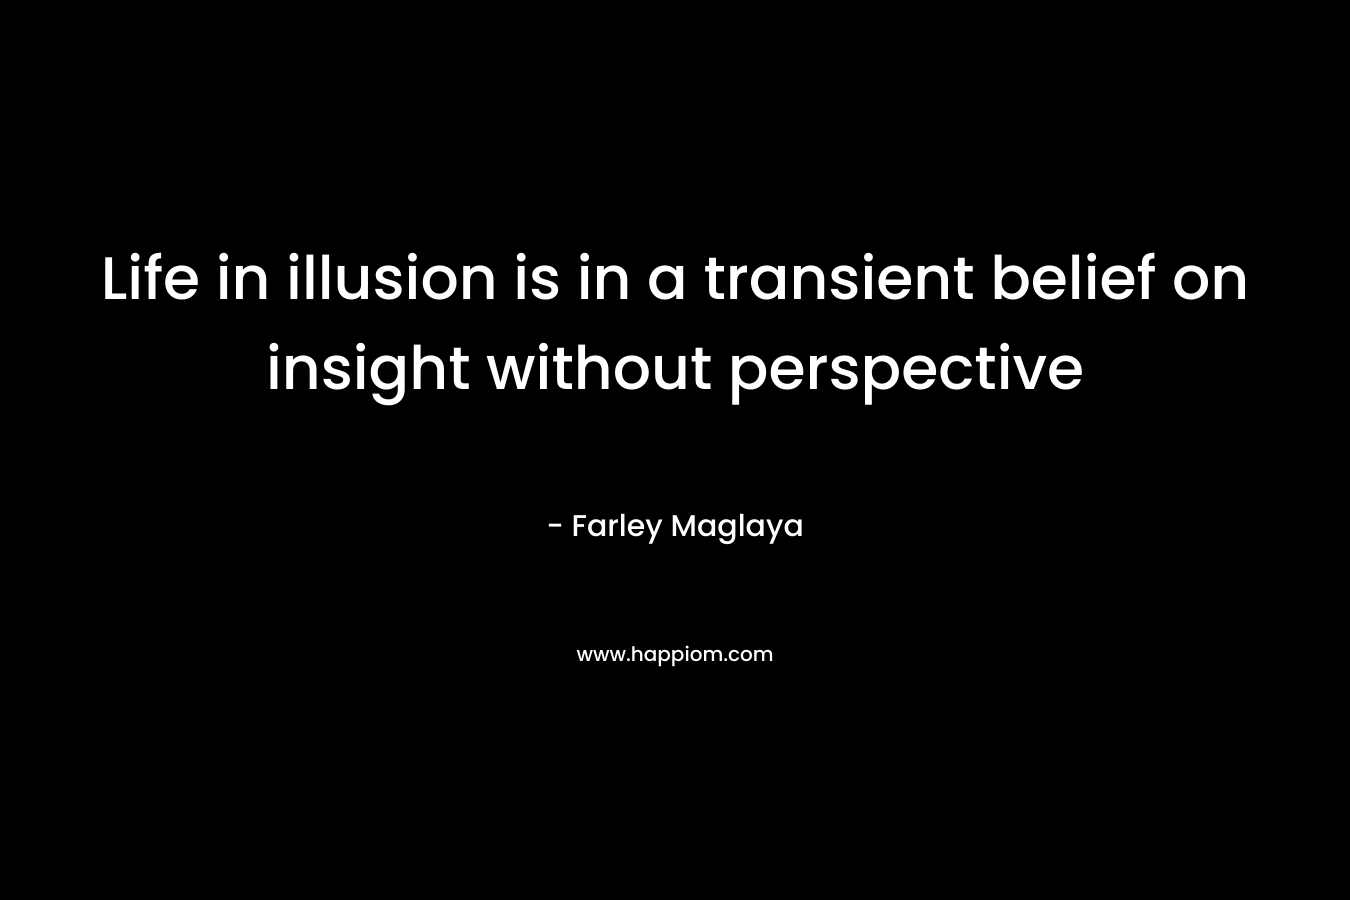 Life in illusion is in a transient belief on insight without perspective – Farley Maglaya